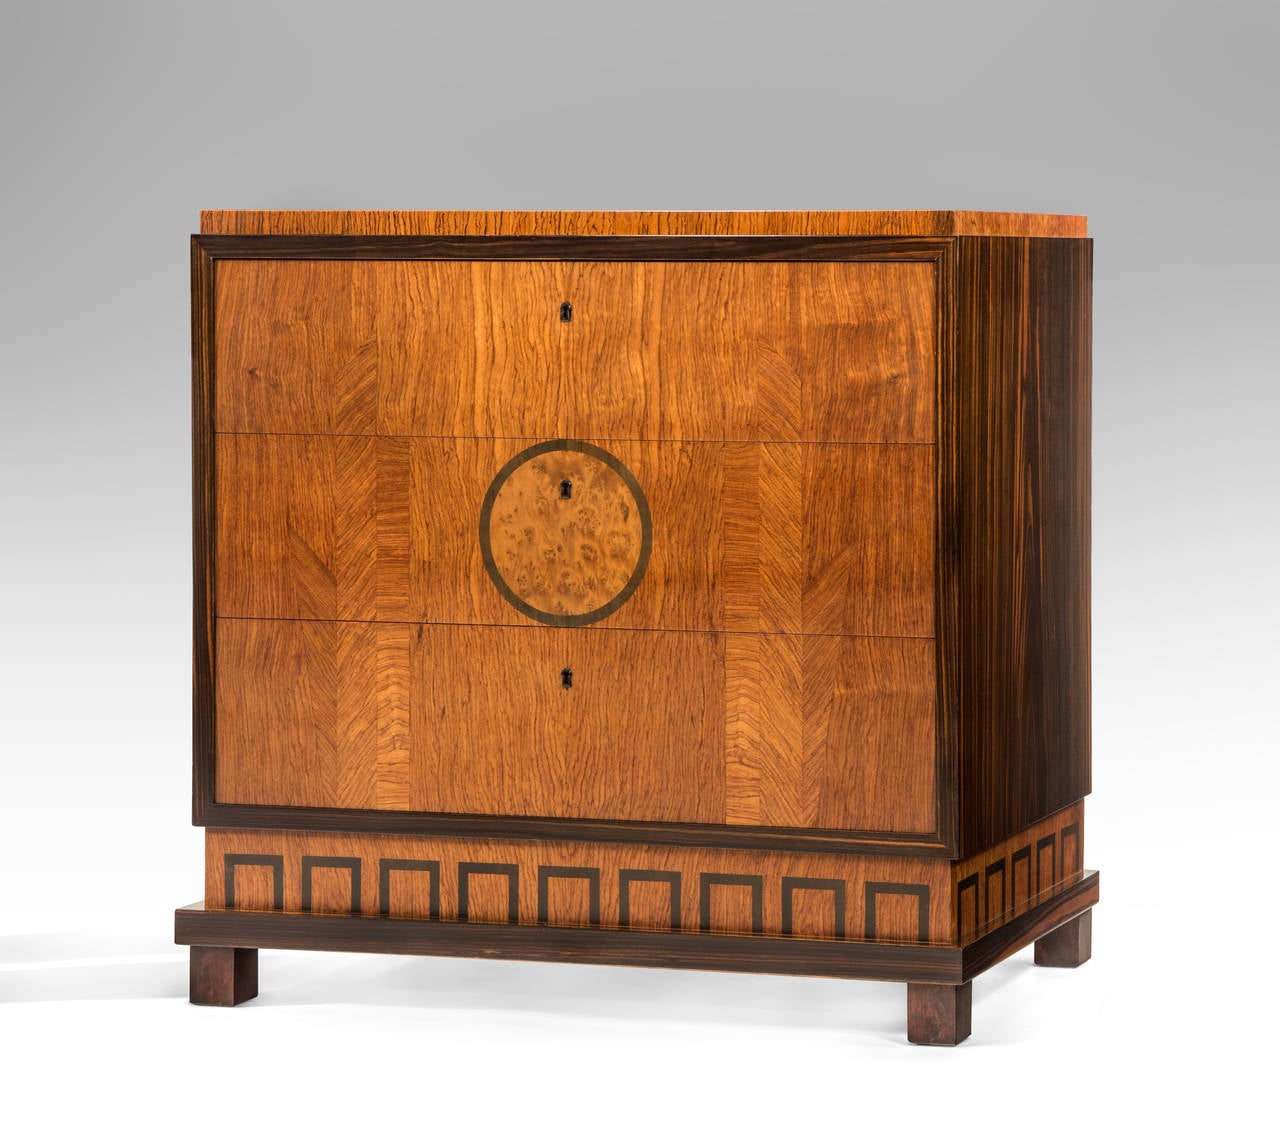 The rectangular top above 3 drawers framed by a macassar border, the center drawer with circular burl-redwood medallion, above a fretwork pattern base, raised on square feet.